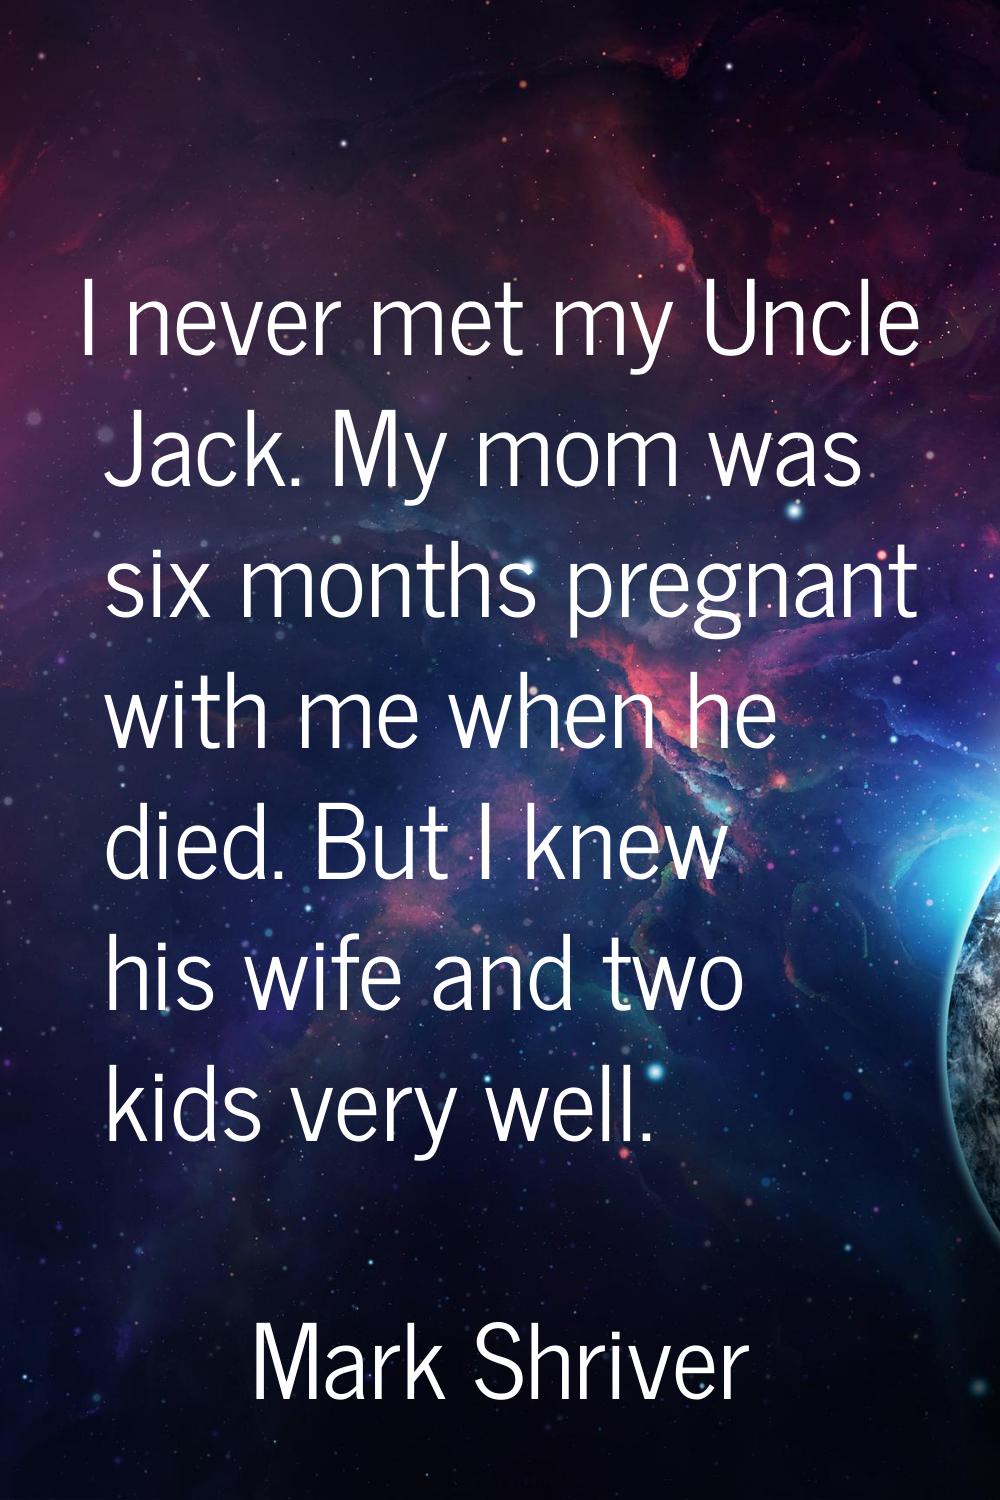 I never met my Uncle Jack. My mom was six months pregnant with me when he died. But I knew his wife